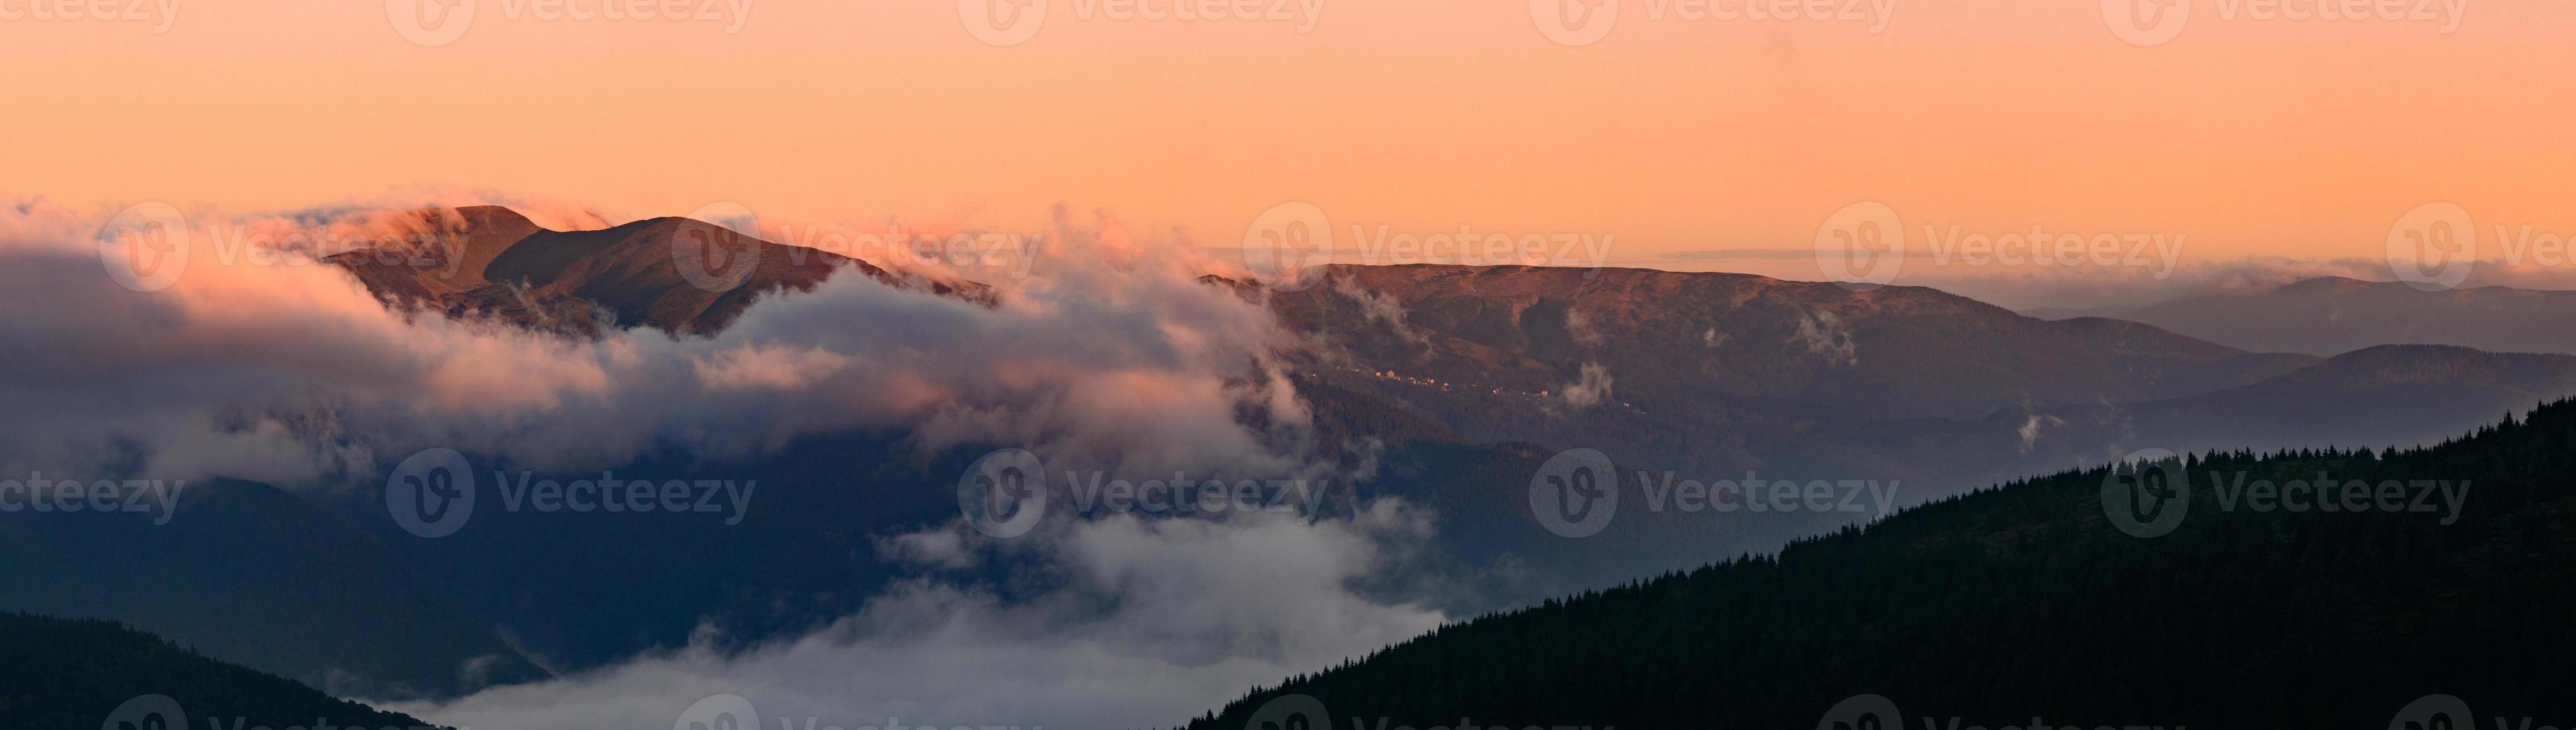 Petros Mountain in the morning fog, overcast mountain range at dawn, the magical mountains of Ukraine. photo